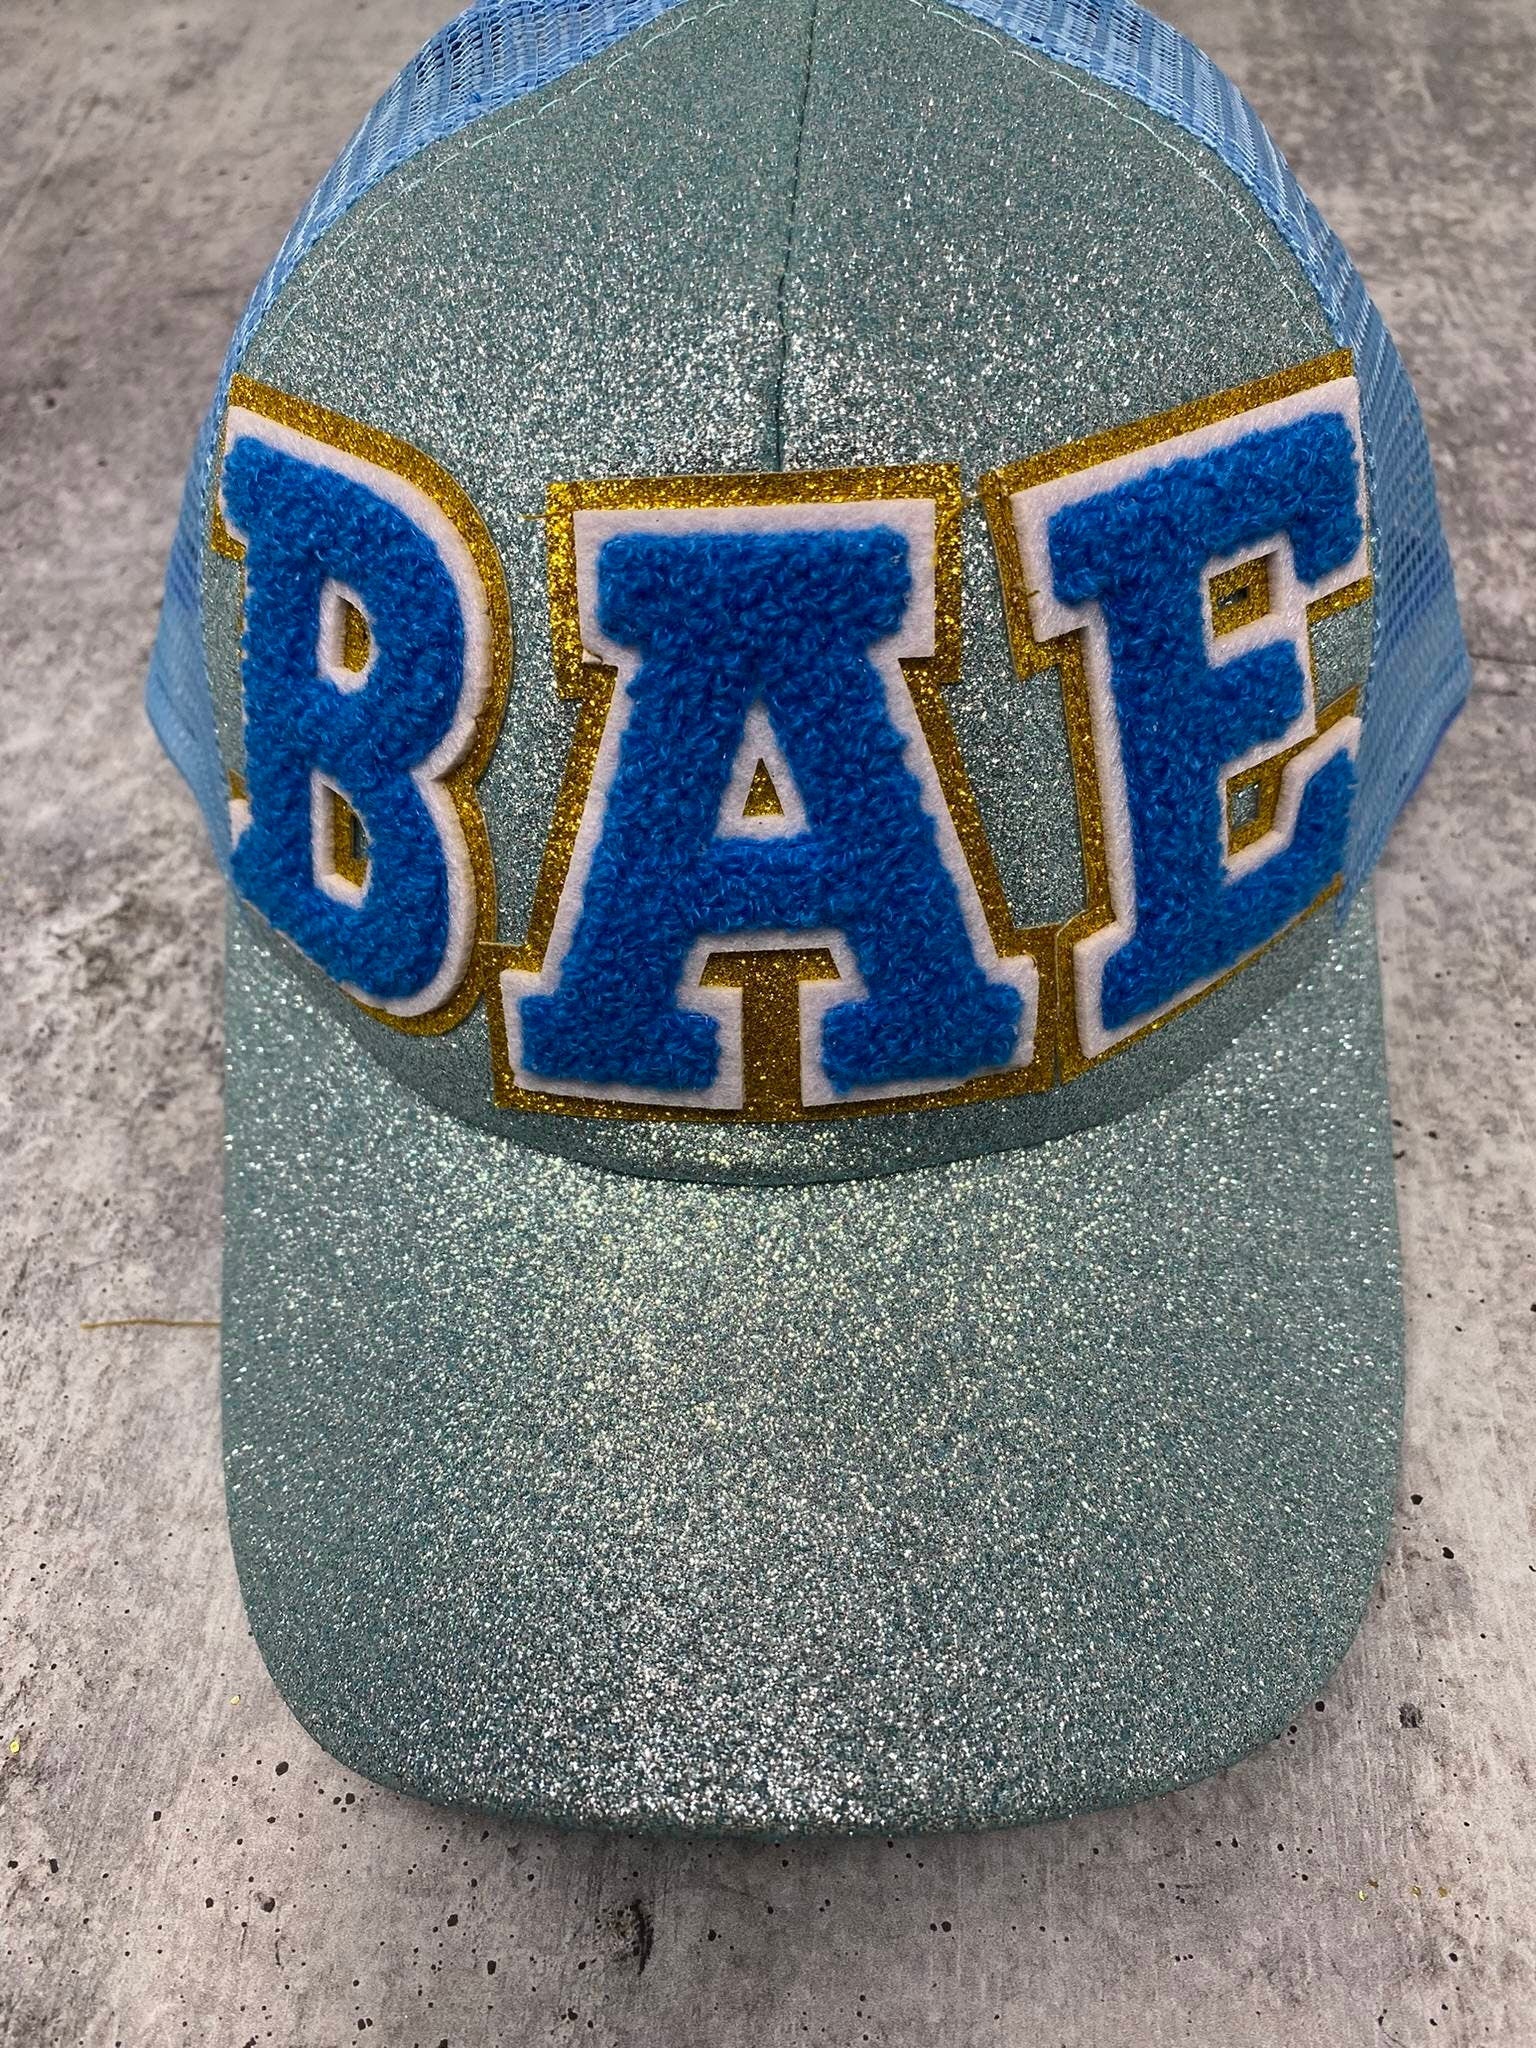 Chenille "BAE" Blue/Gold/White Messy Bun/Ponytail Hat, Glitter Hat, Cute Bad Hair Day Hat, Fashionable Hat for Spring and Summer Hairstyle